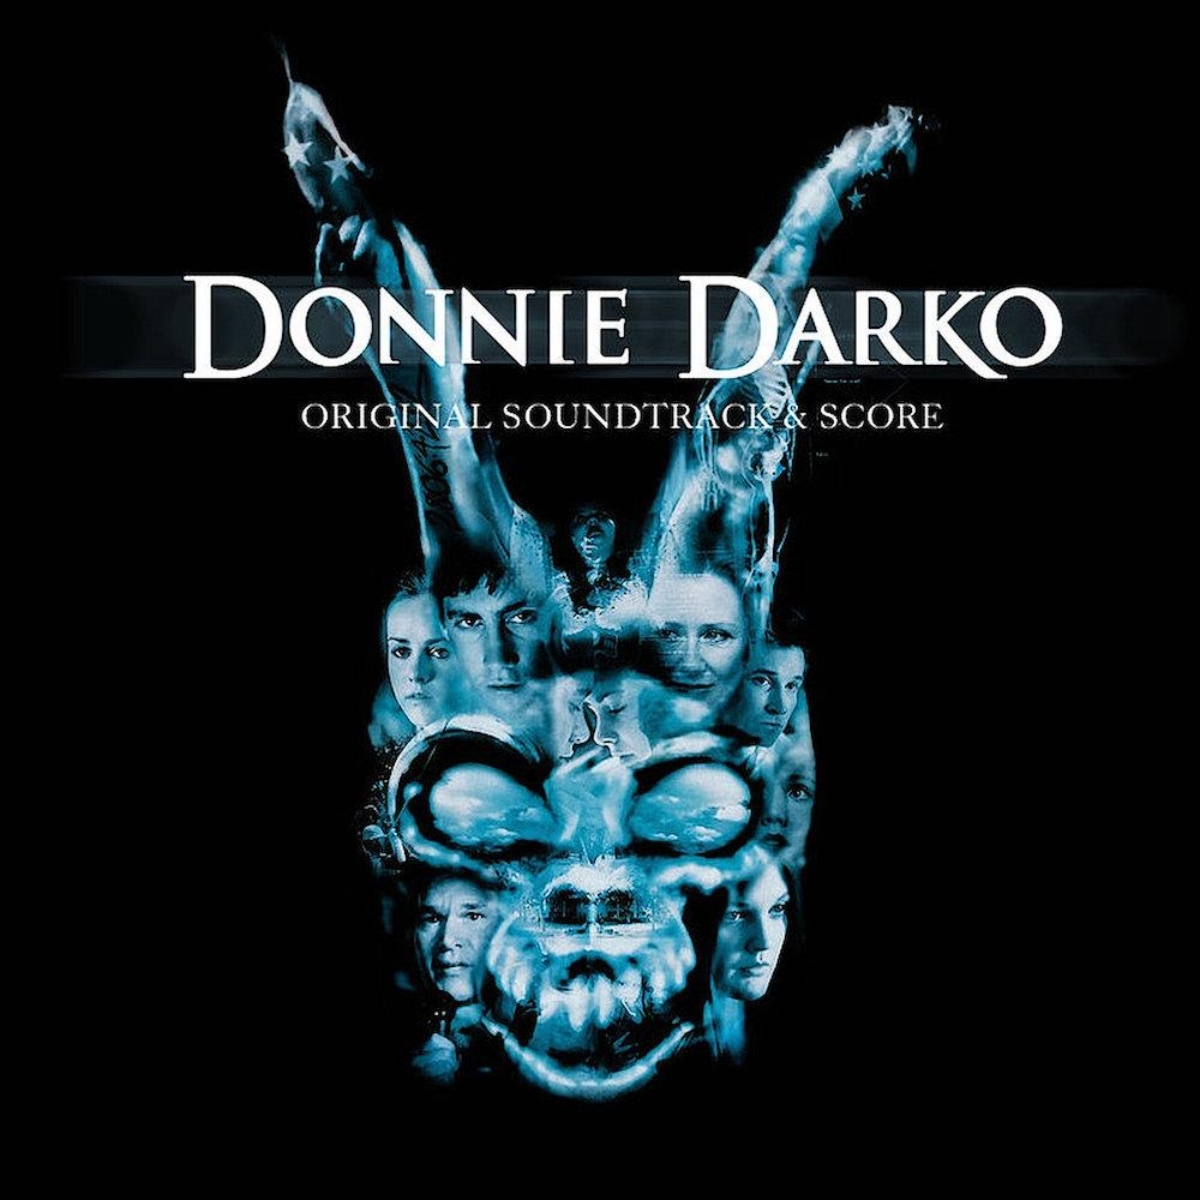 <p>The 2001 film <a href="https://www.imdb.com/title/tt0246578/" class="CMY_Link CMY_Valid"><em>Donnie Darko</em></a> reinvigorated interest in some of Tears For Fears’ biggest hits. A version of the band’s “Mad World” was recorded for the film by the duo <a href="https://www.youtube.com/watch?v=IBscOcU_uY0" class="CMY_Link CMY_Valid">Michael Andrews and Gary Jules</a>, and <a href="https://www.tunefind.com/movie/donnie-darko-2001" class="CMY_Link CMY_Valid">the soundtrack</a> also included the original version of “Head Over Heels.” <a href="https://www.stereogum.com/2171862/curt-smith-tears-for-fears-donnie-darko-psych-1975/interviews/weve-got-a-file-on-you/" class="CMY_Link CMY_Valid">Smith said</a> while he thinks the “more powerful use” of their music in the film is “Head Over Heels,” the cover of “Mad World” did chart at No. 1 in the UK, while the original peaked at No. 3.</p>